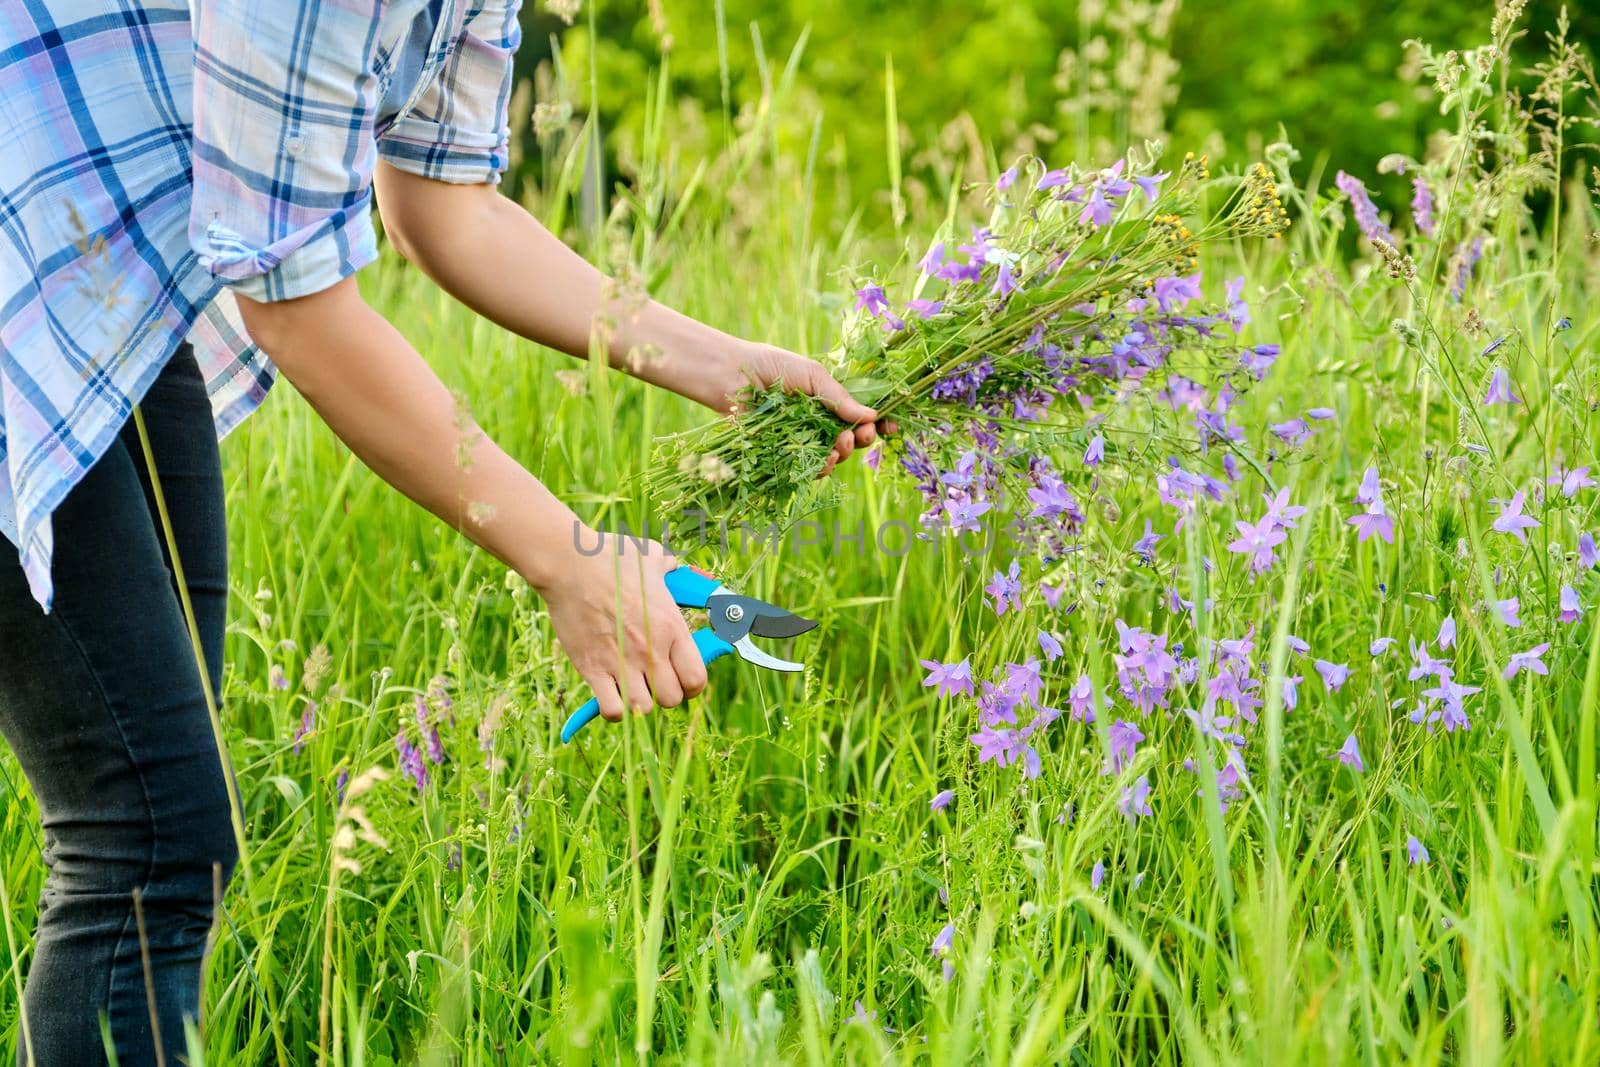 Woman picking wildflowers bells in a spring summer grass meadow. Close-up of a female's hand with a garden pruner and a bouquet of flowers